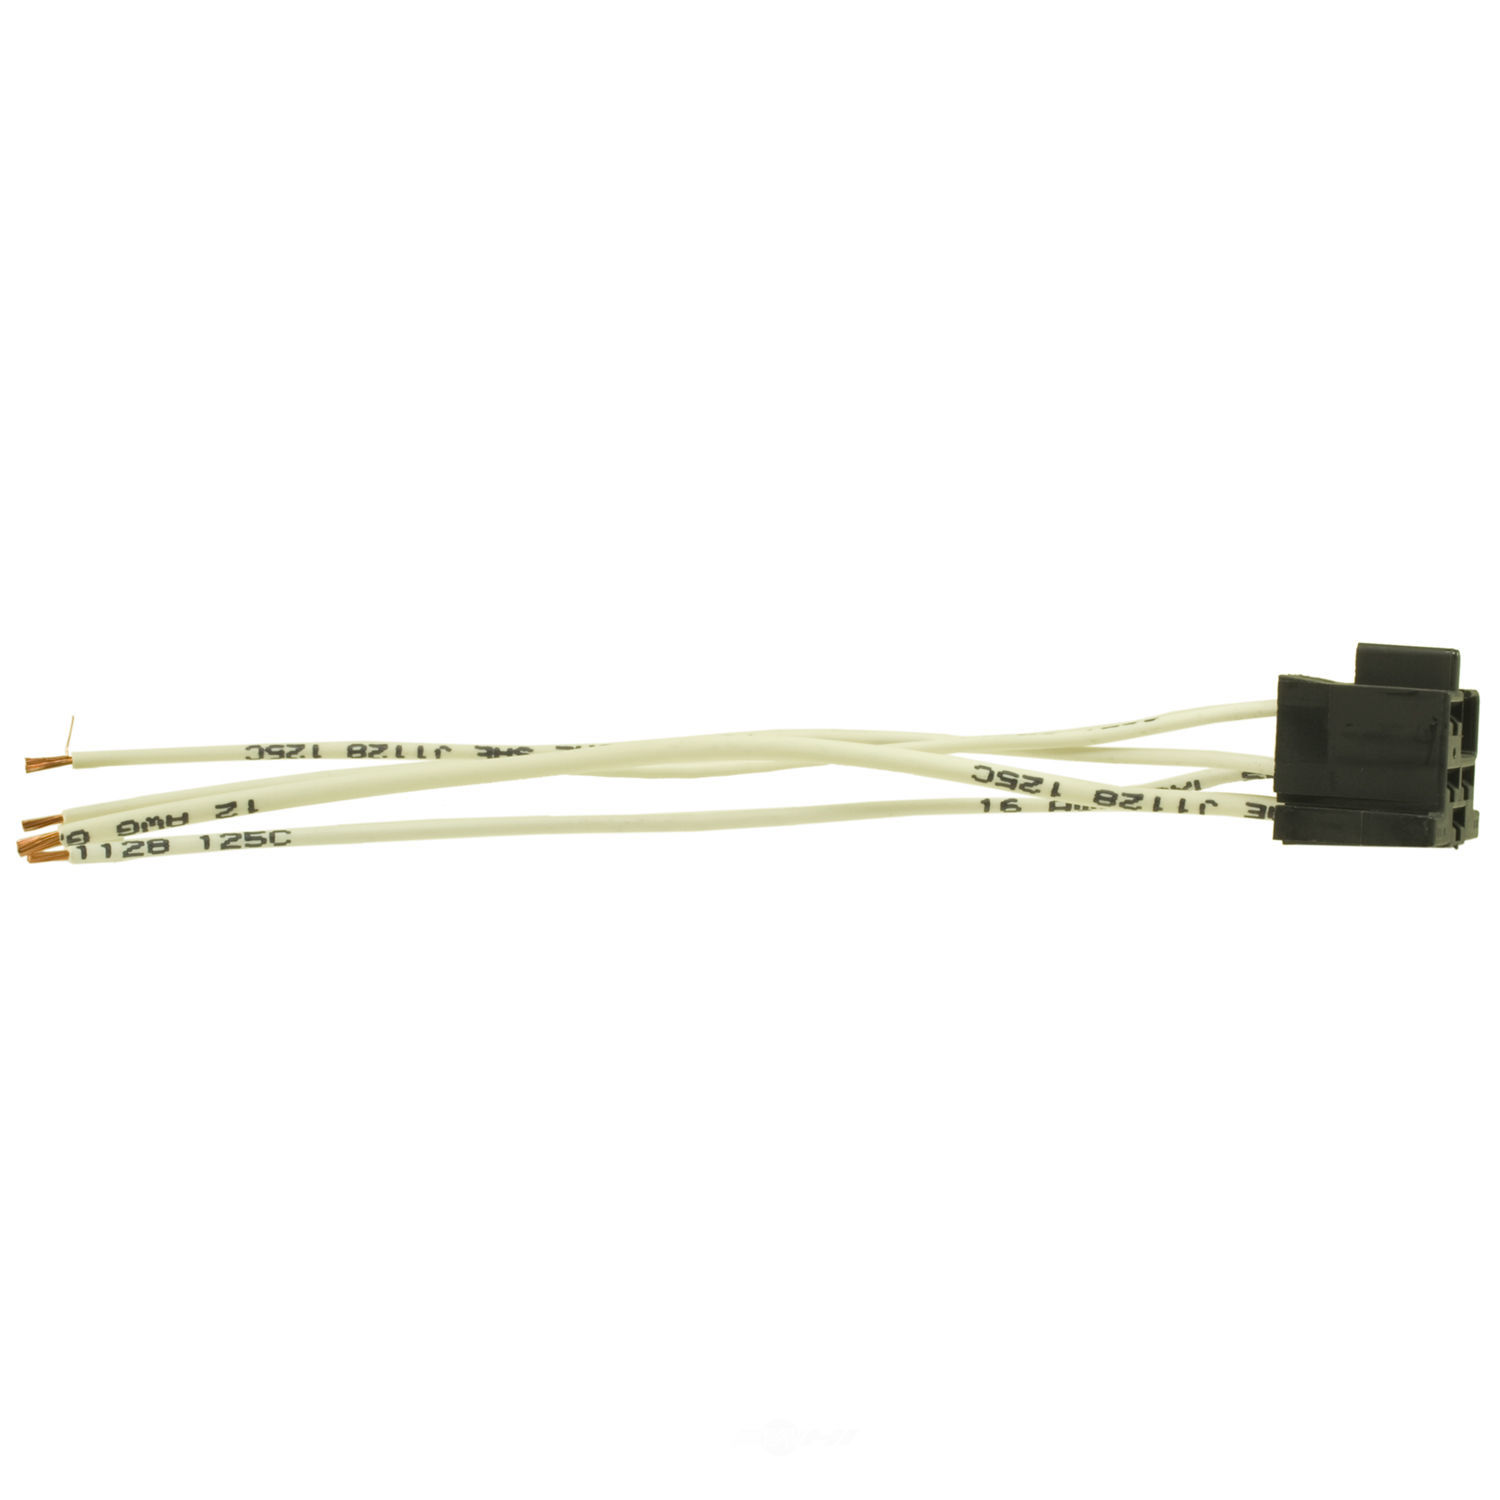 WVE - Dimmer Switch Connector - WVE 1P1216